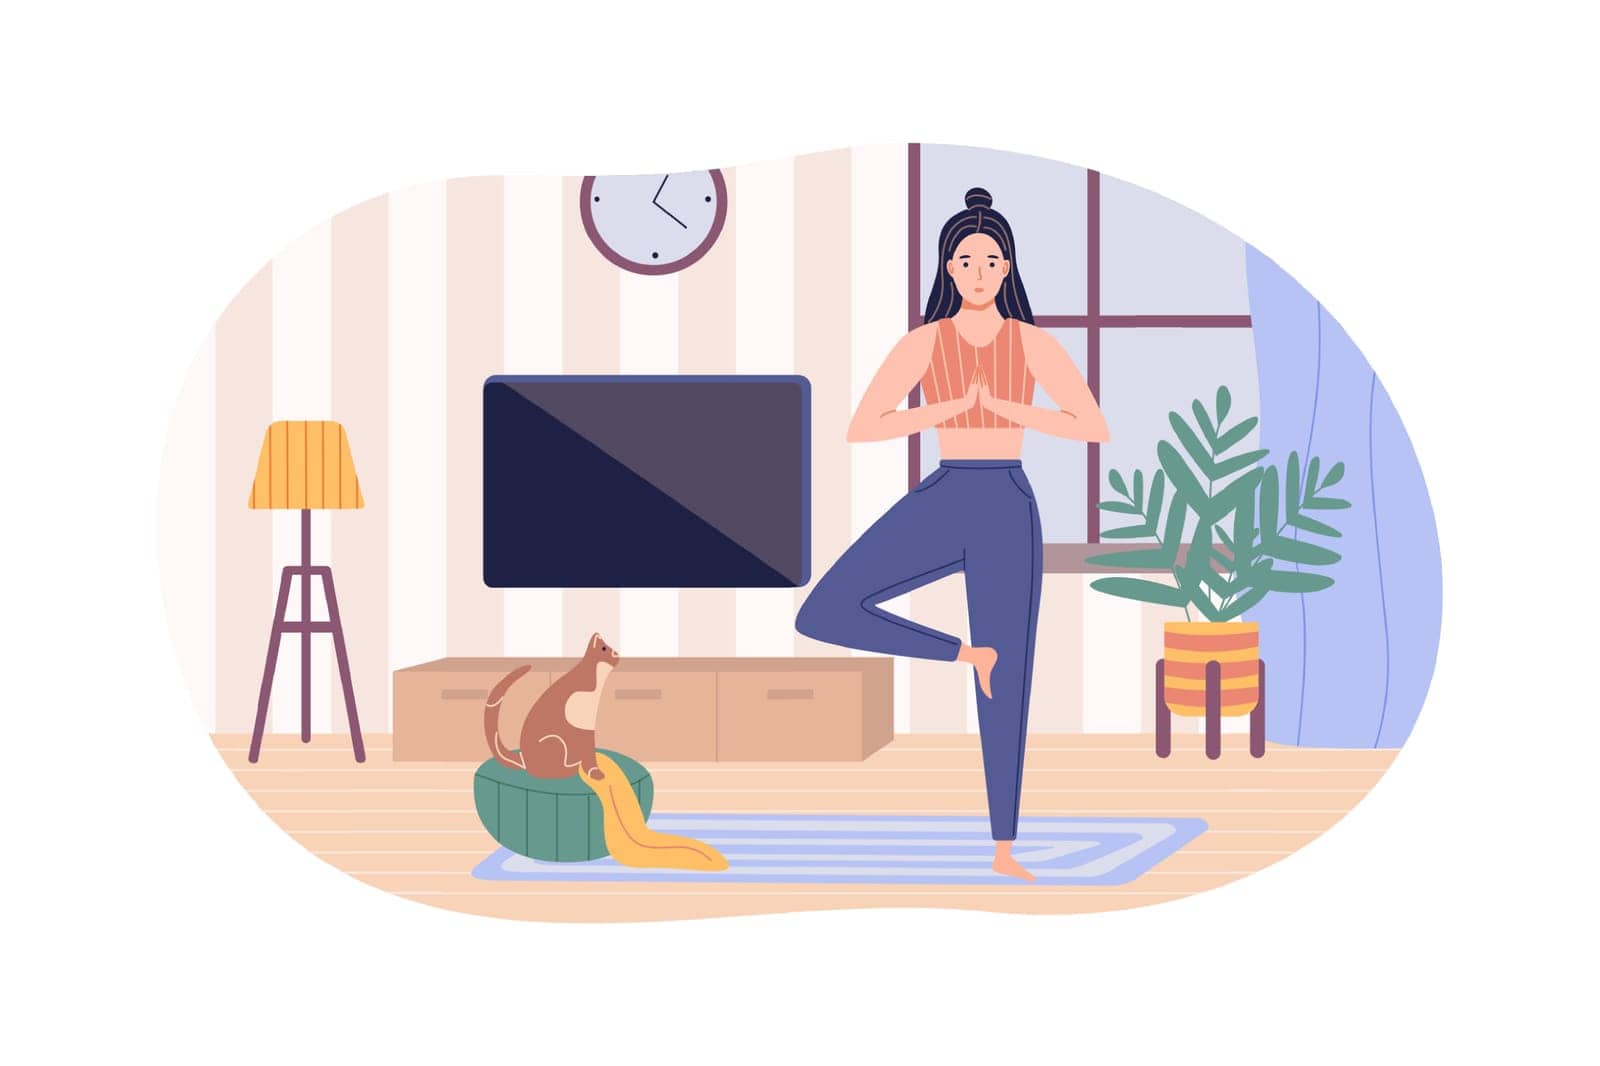 The girl is doing exercises in the living room. Daily routines and everyday activities of young women spend time. Flat cartoon vector illustration.